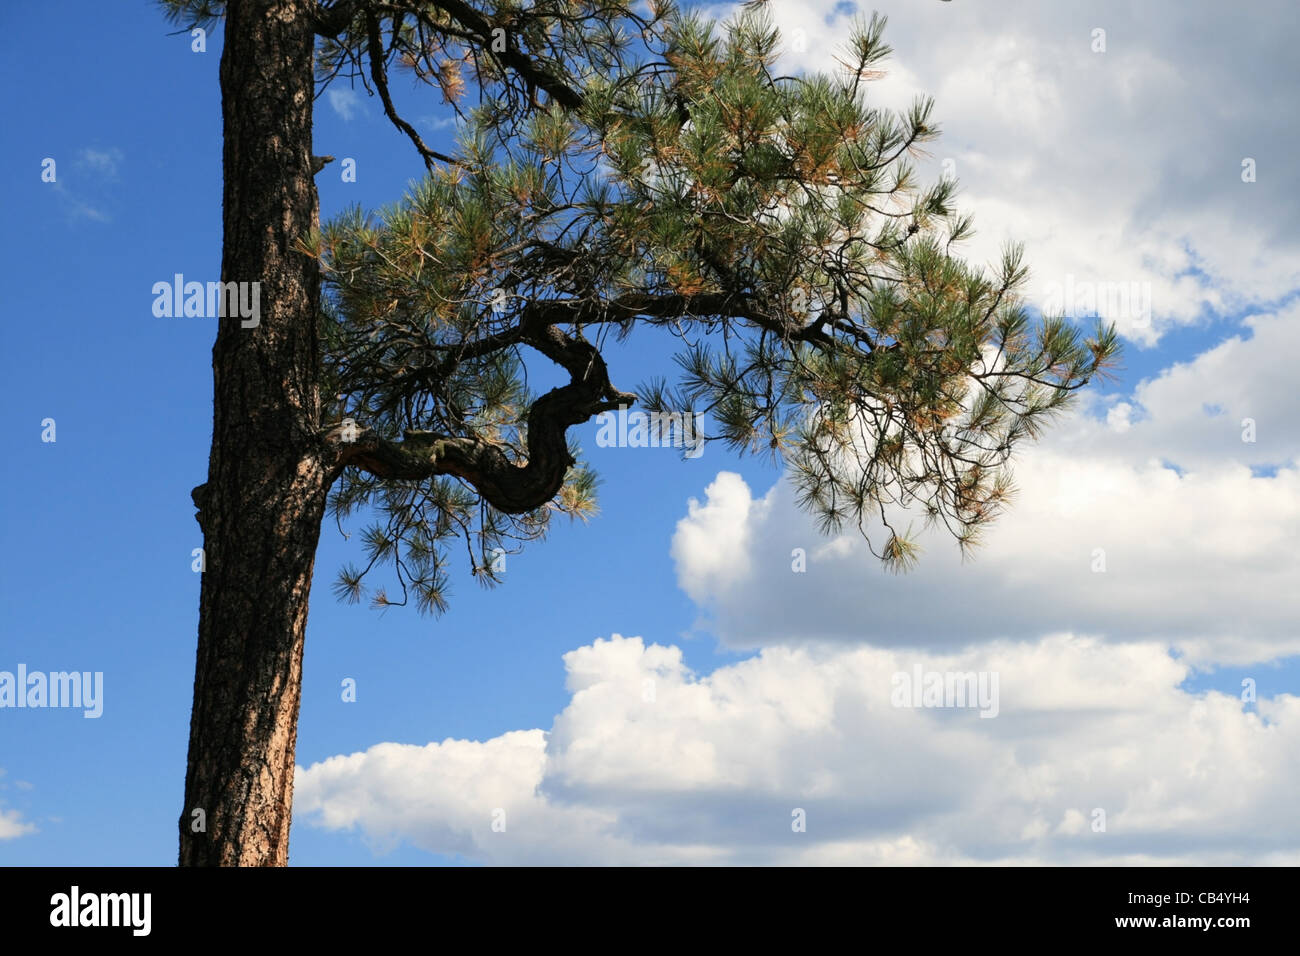 curved ponderosa pine branch against a partly cloudy blue sky Stock Photo